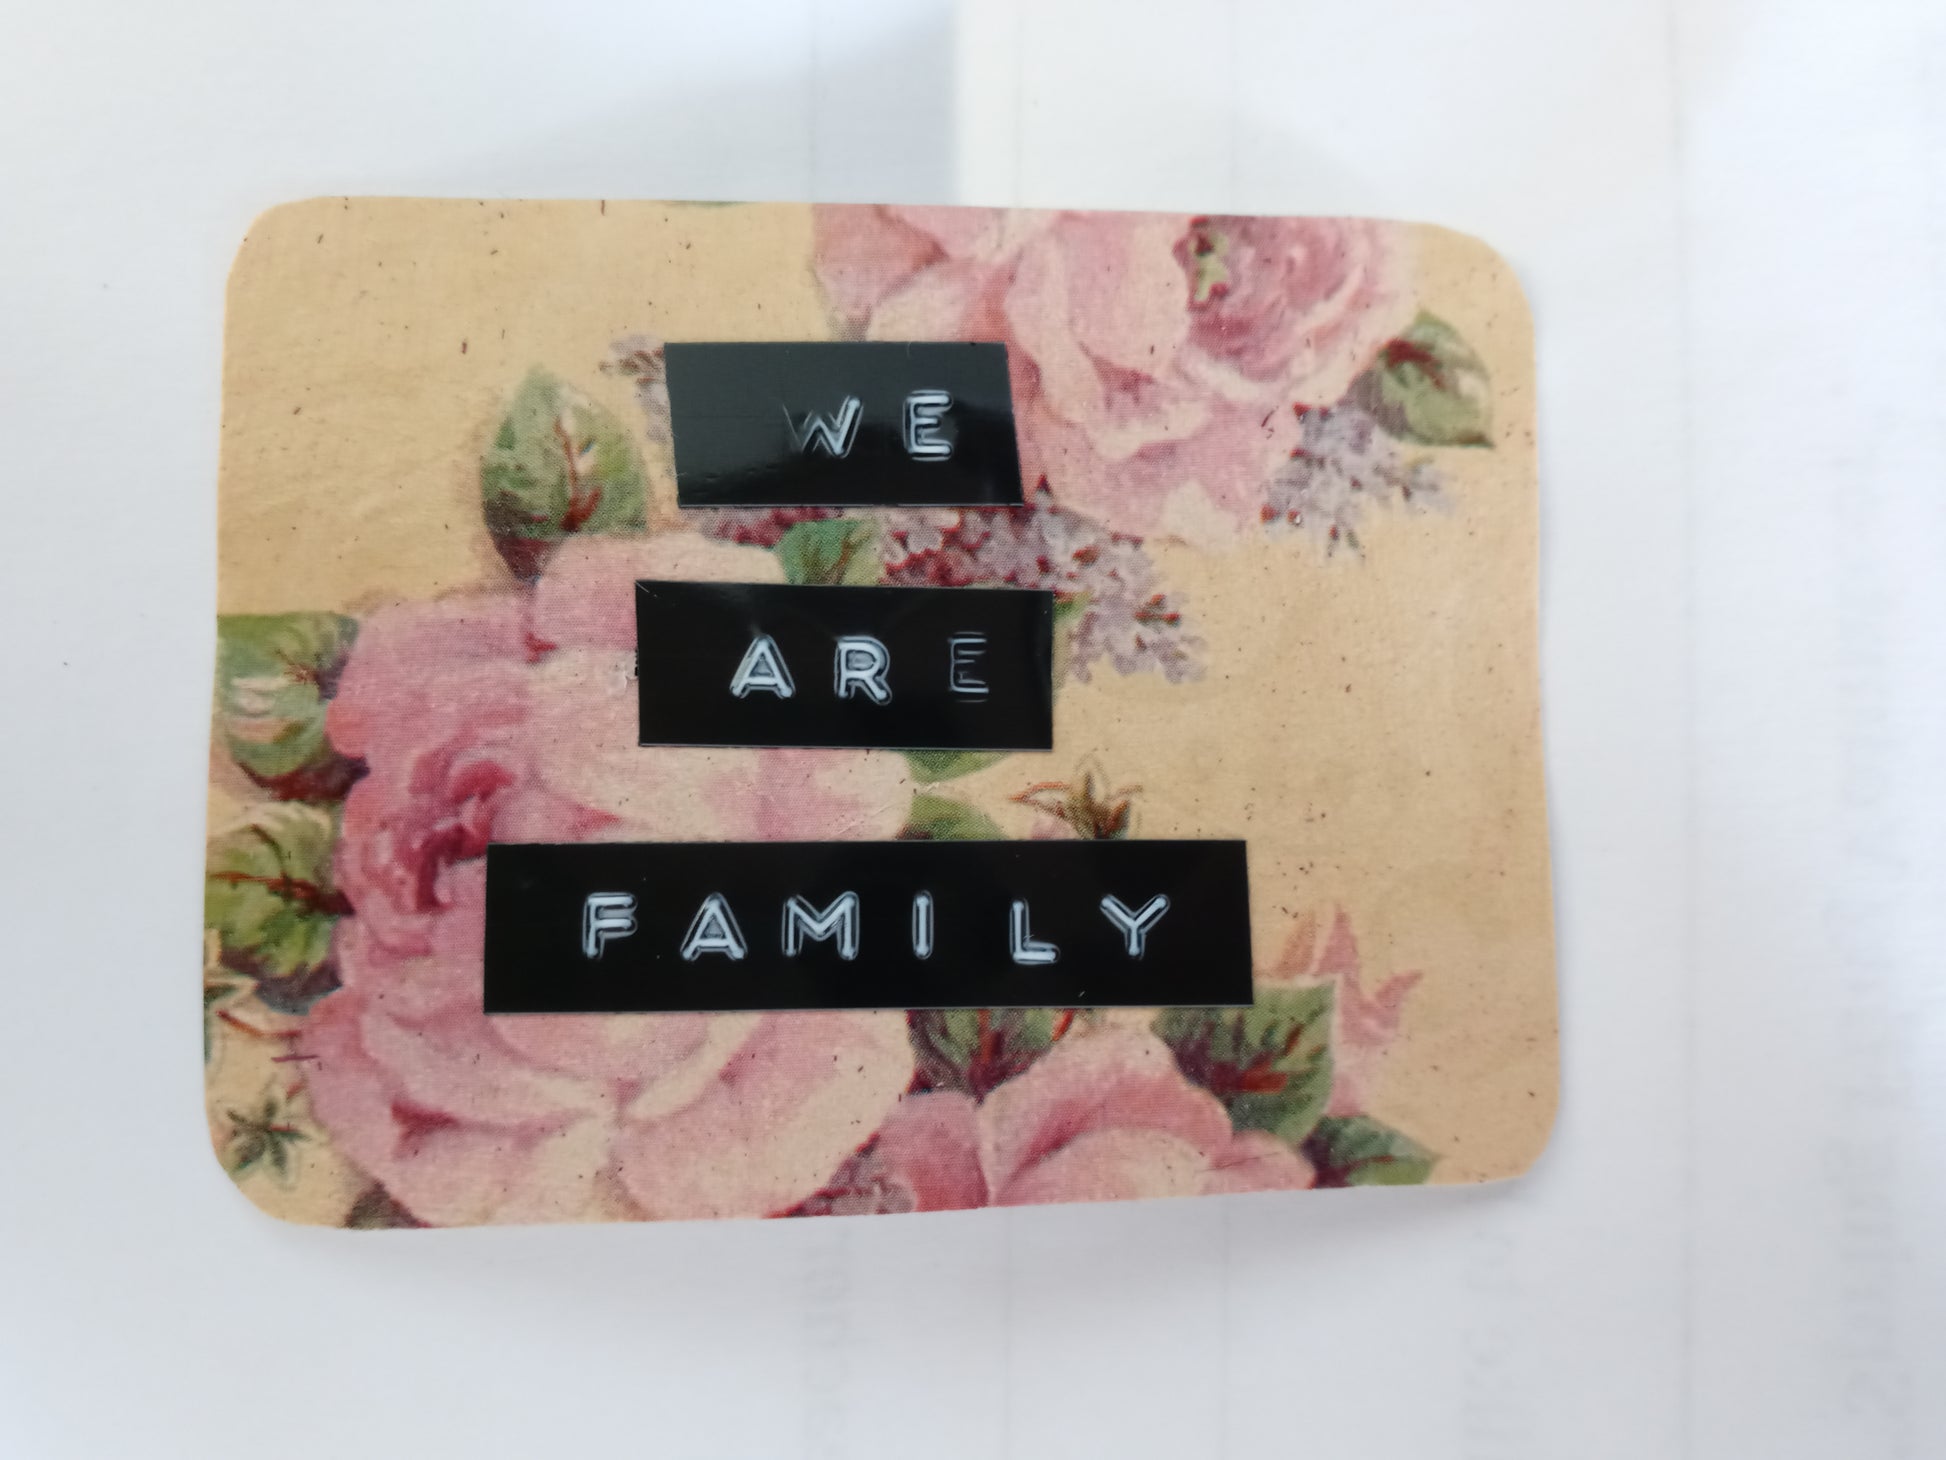 A handmade sticker in the shape of an irregular, rounded off rectangle with a floral background in beige, pink and green. Over top there are 3 lines of text made with a label maker that read "WE ARE FAMILY"